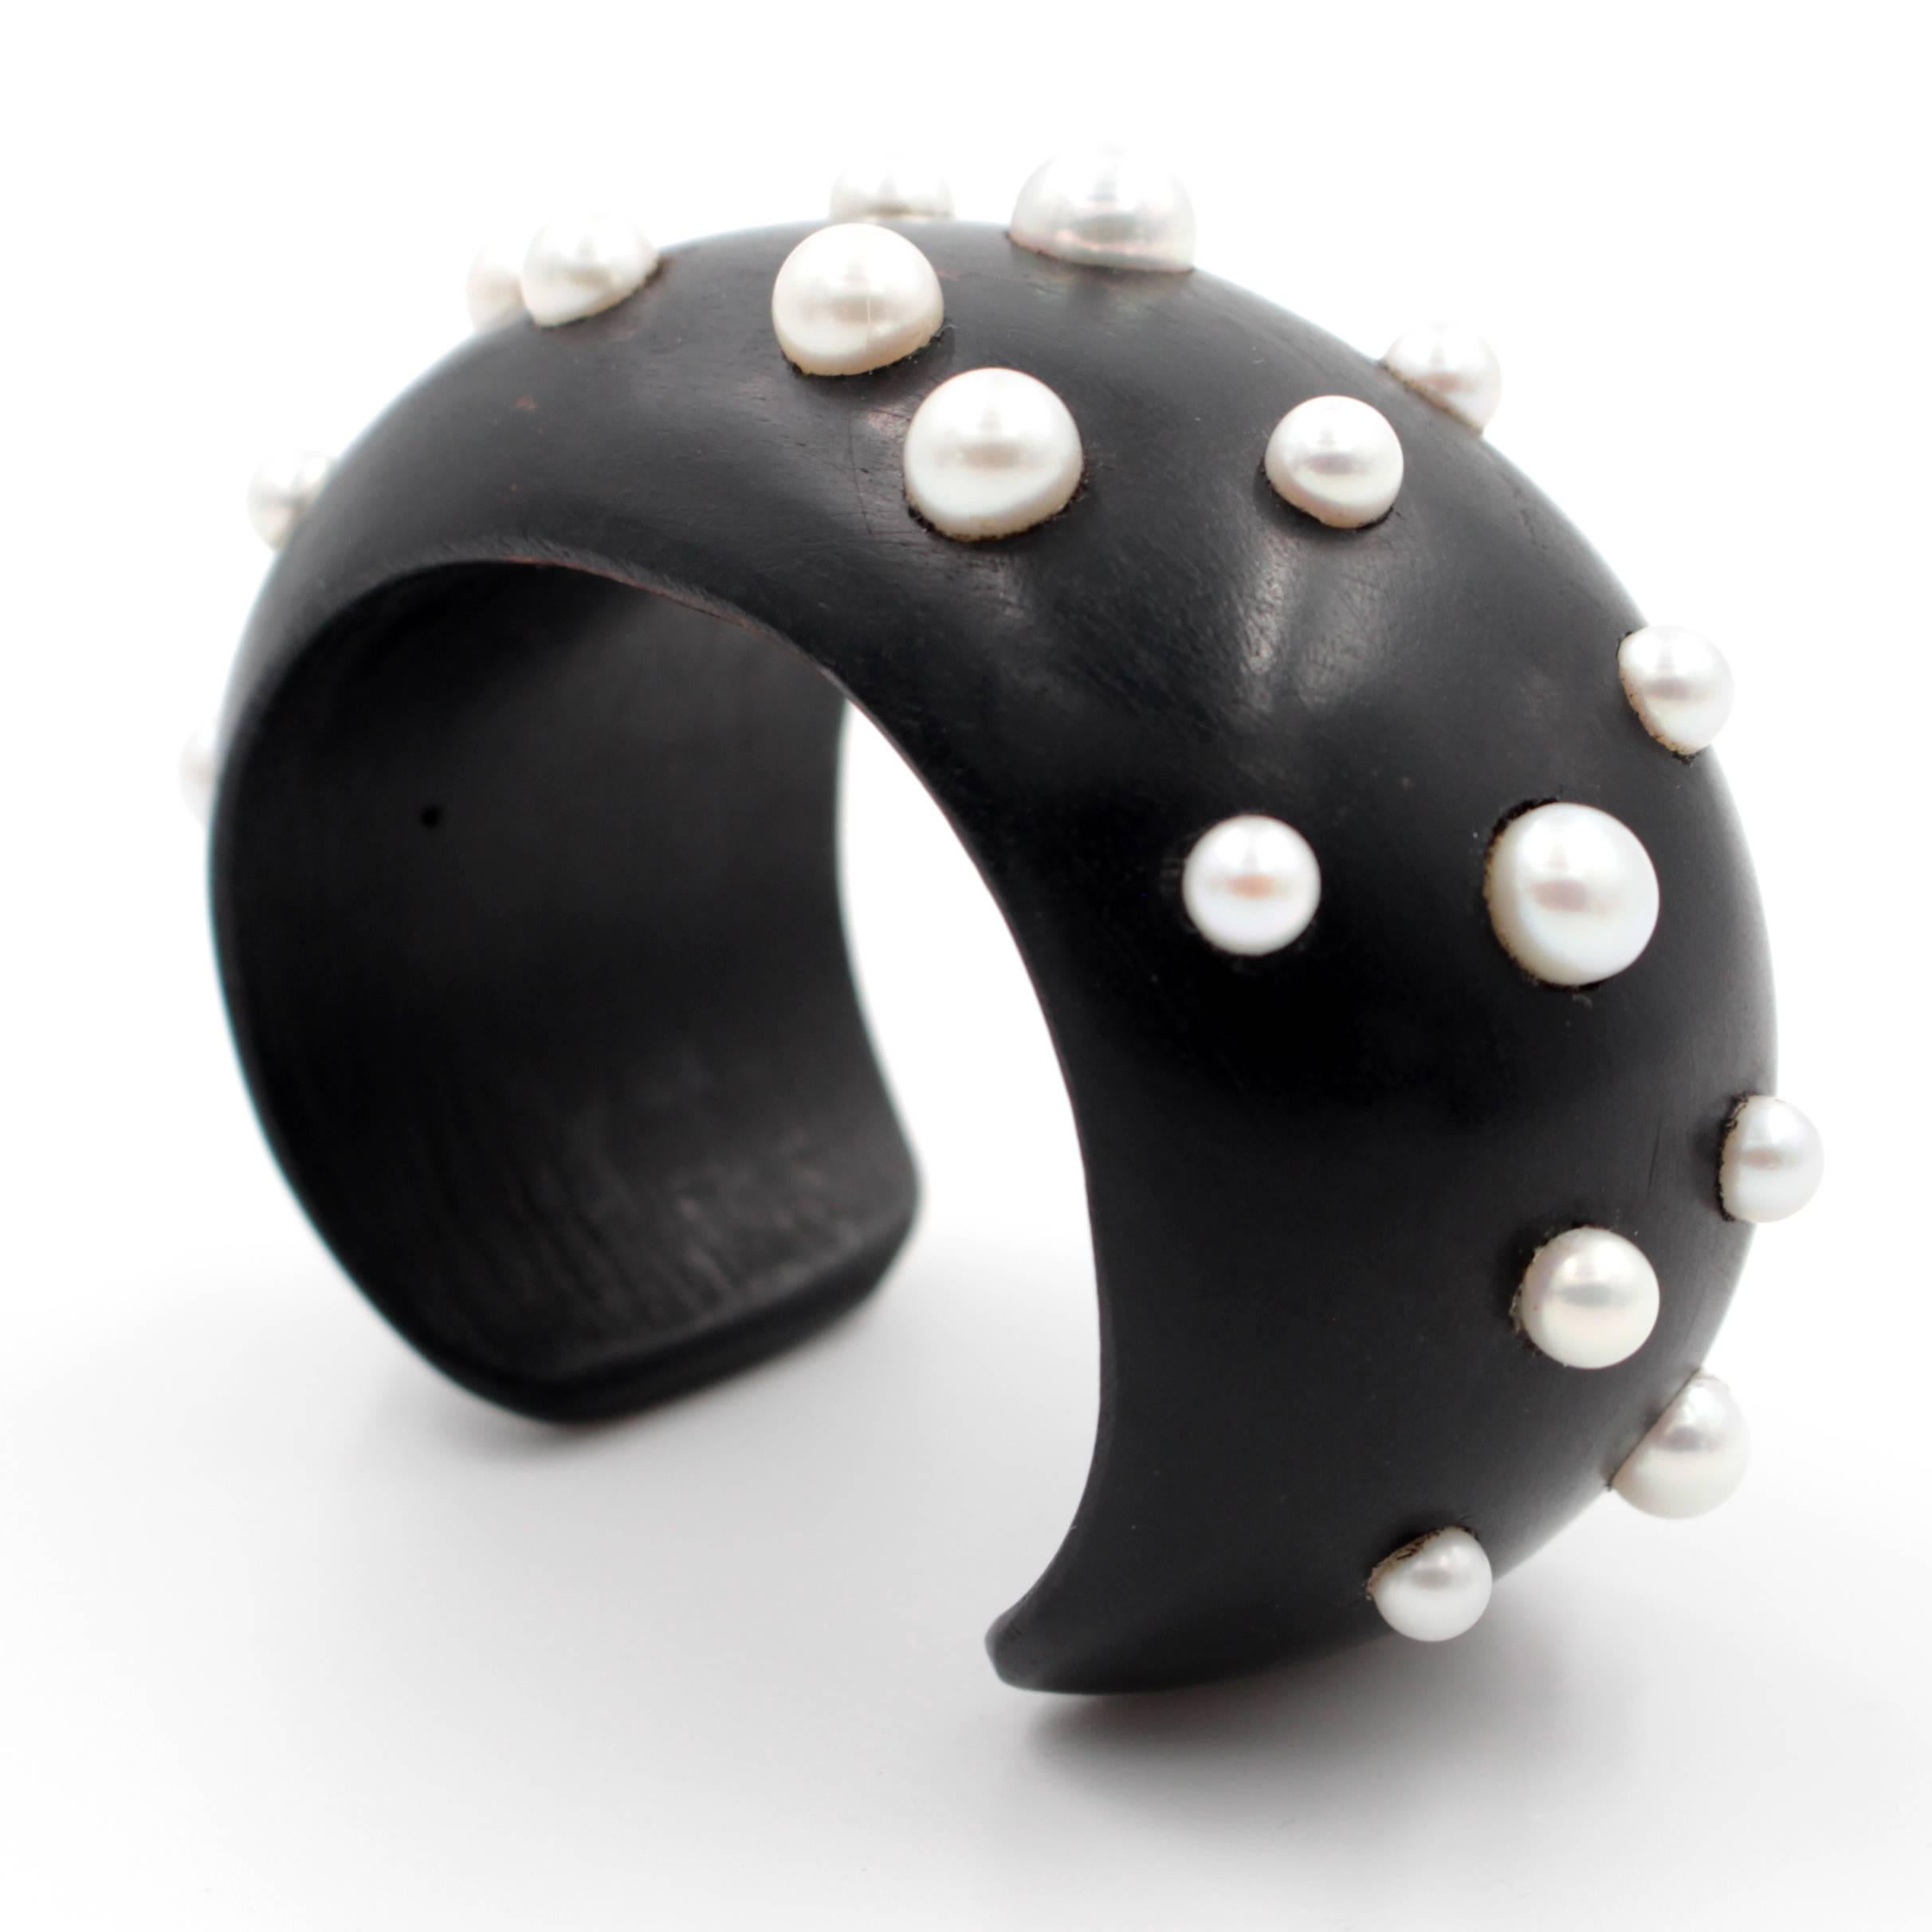 This chic ebony wood cuff bracelet features pearls set with 18 karat yellow gold screws. This unique piece may be worn with formal attire or with jeans for a casual look.